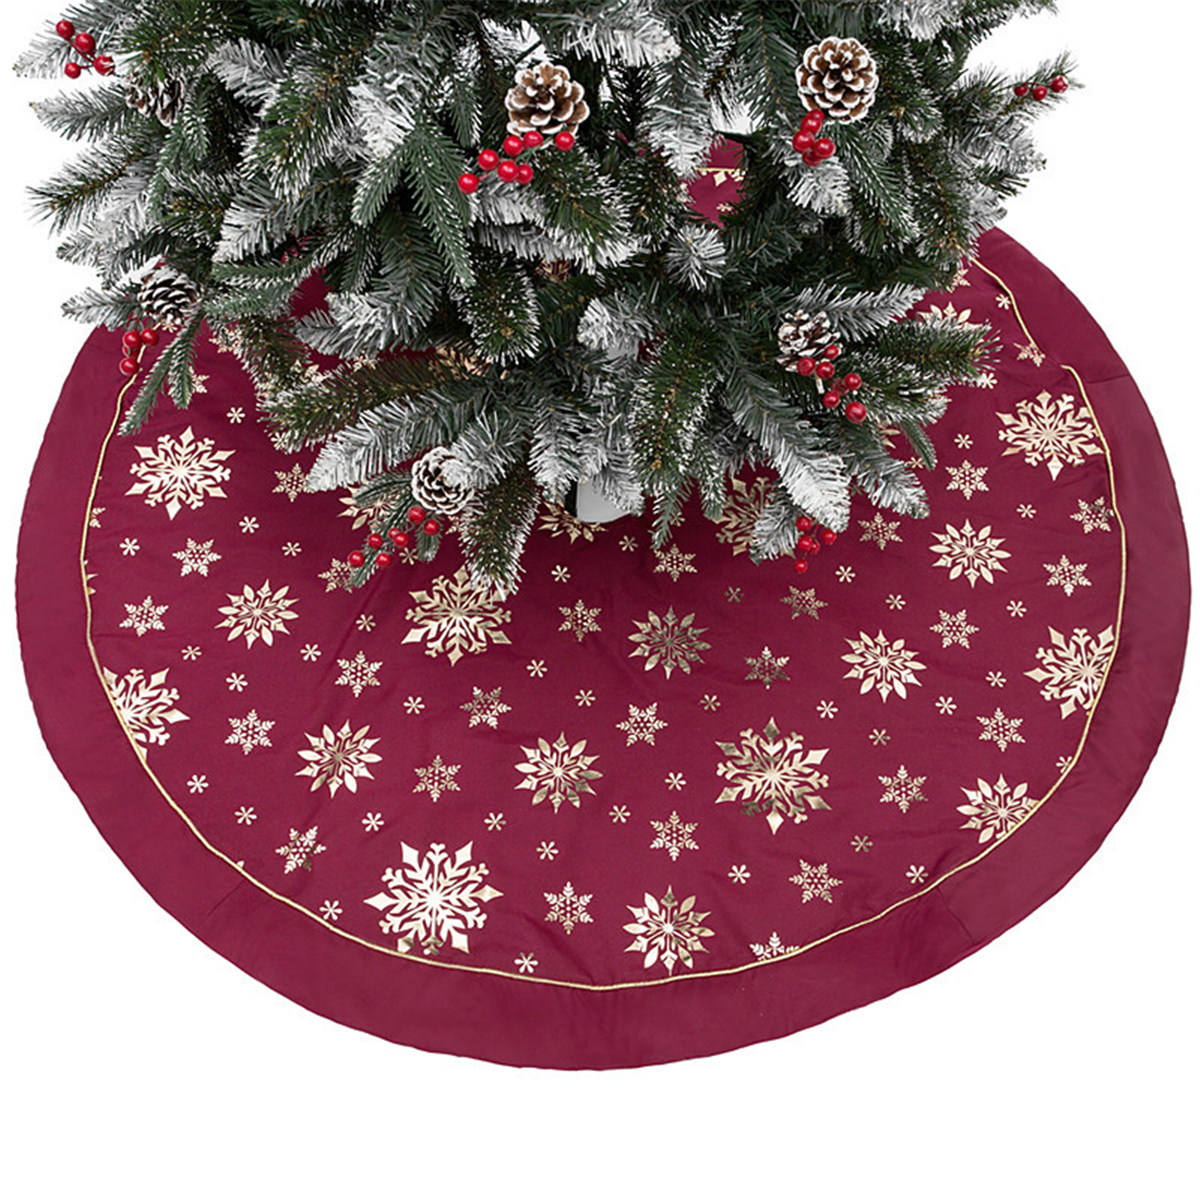 120cm-Stitched-Santa-Christmas-Snowflake-Skir-Tree-Skirt-for-Home-New-Year-2020-Christmas-Fancy-Deco-1770958-8